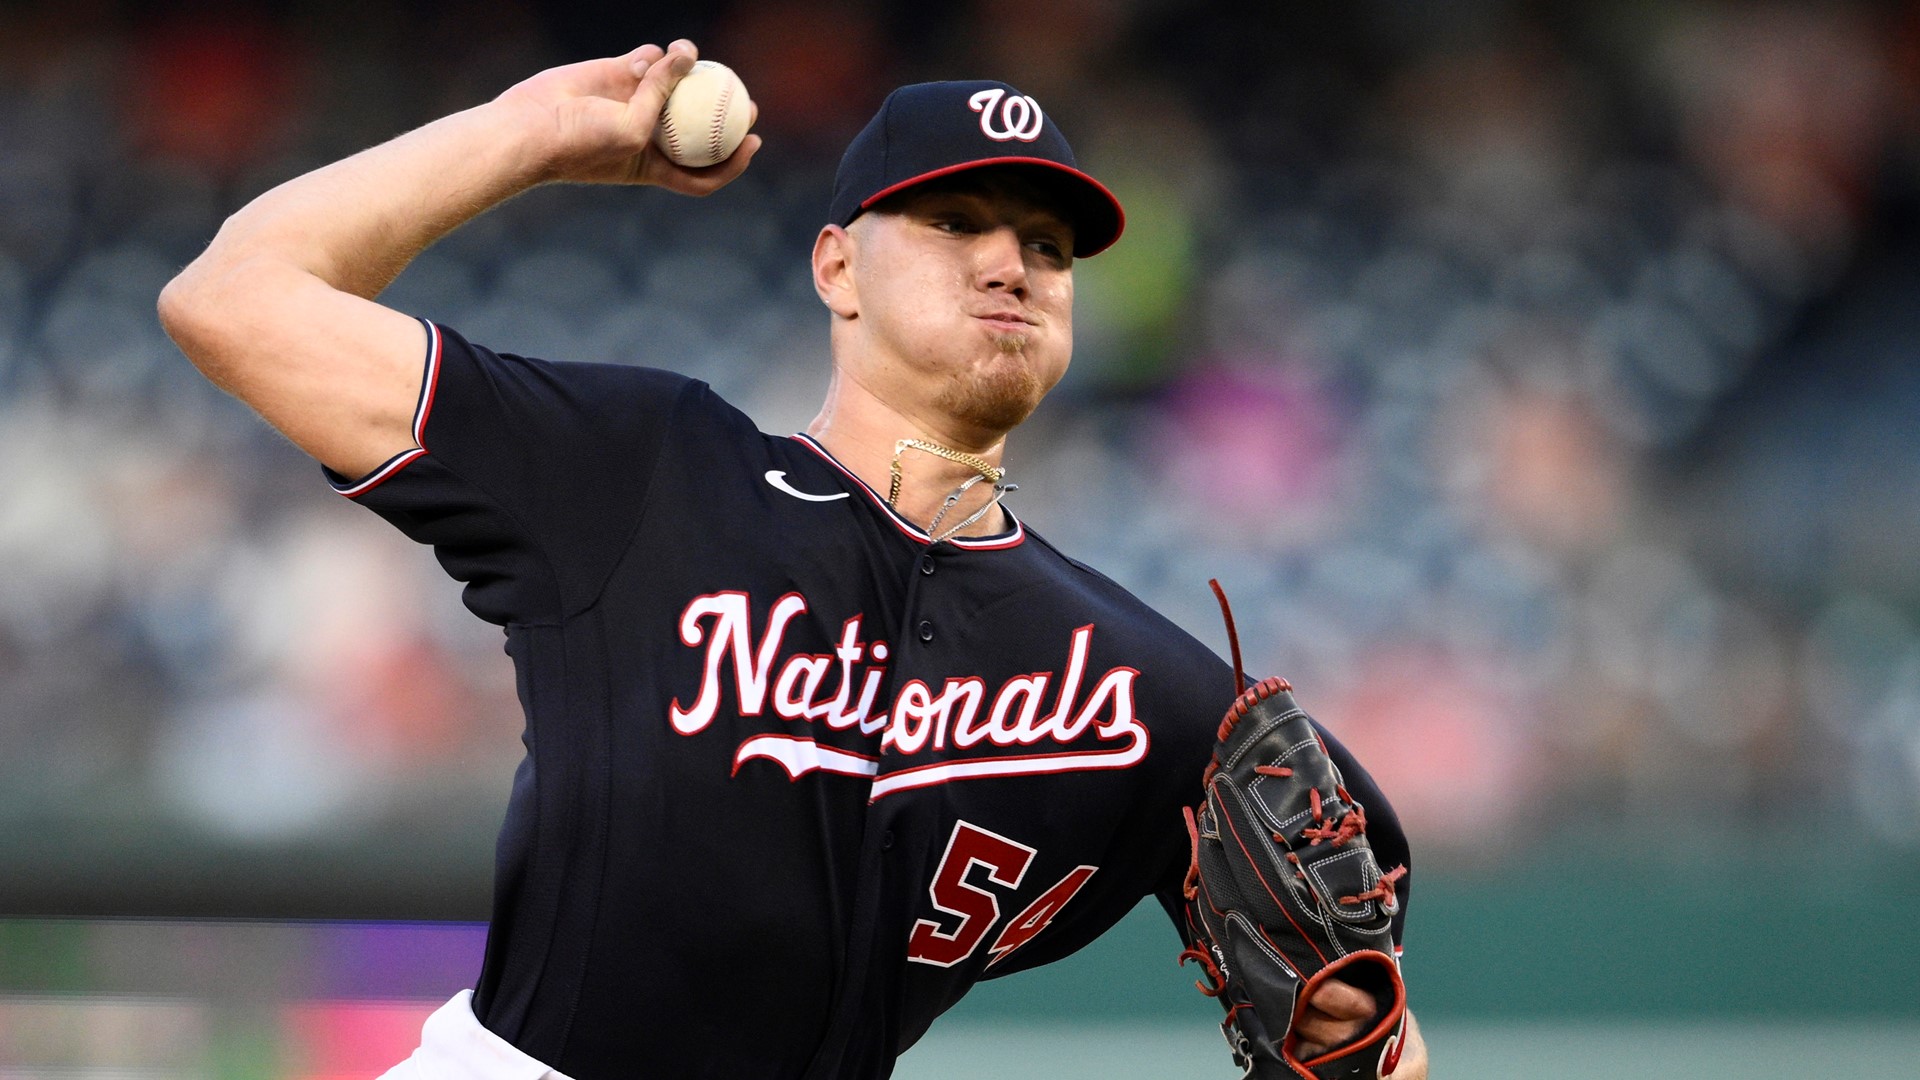 The Locked On Nationals podcast previewes Cade Cavalli's much anticipated start with the Washington Nationals.